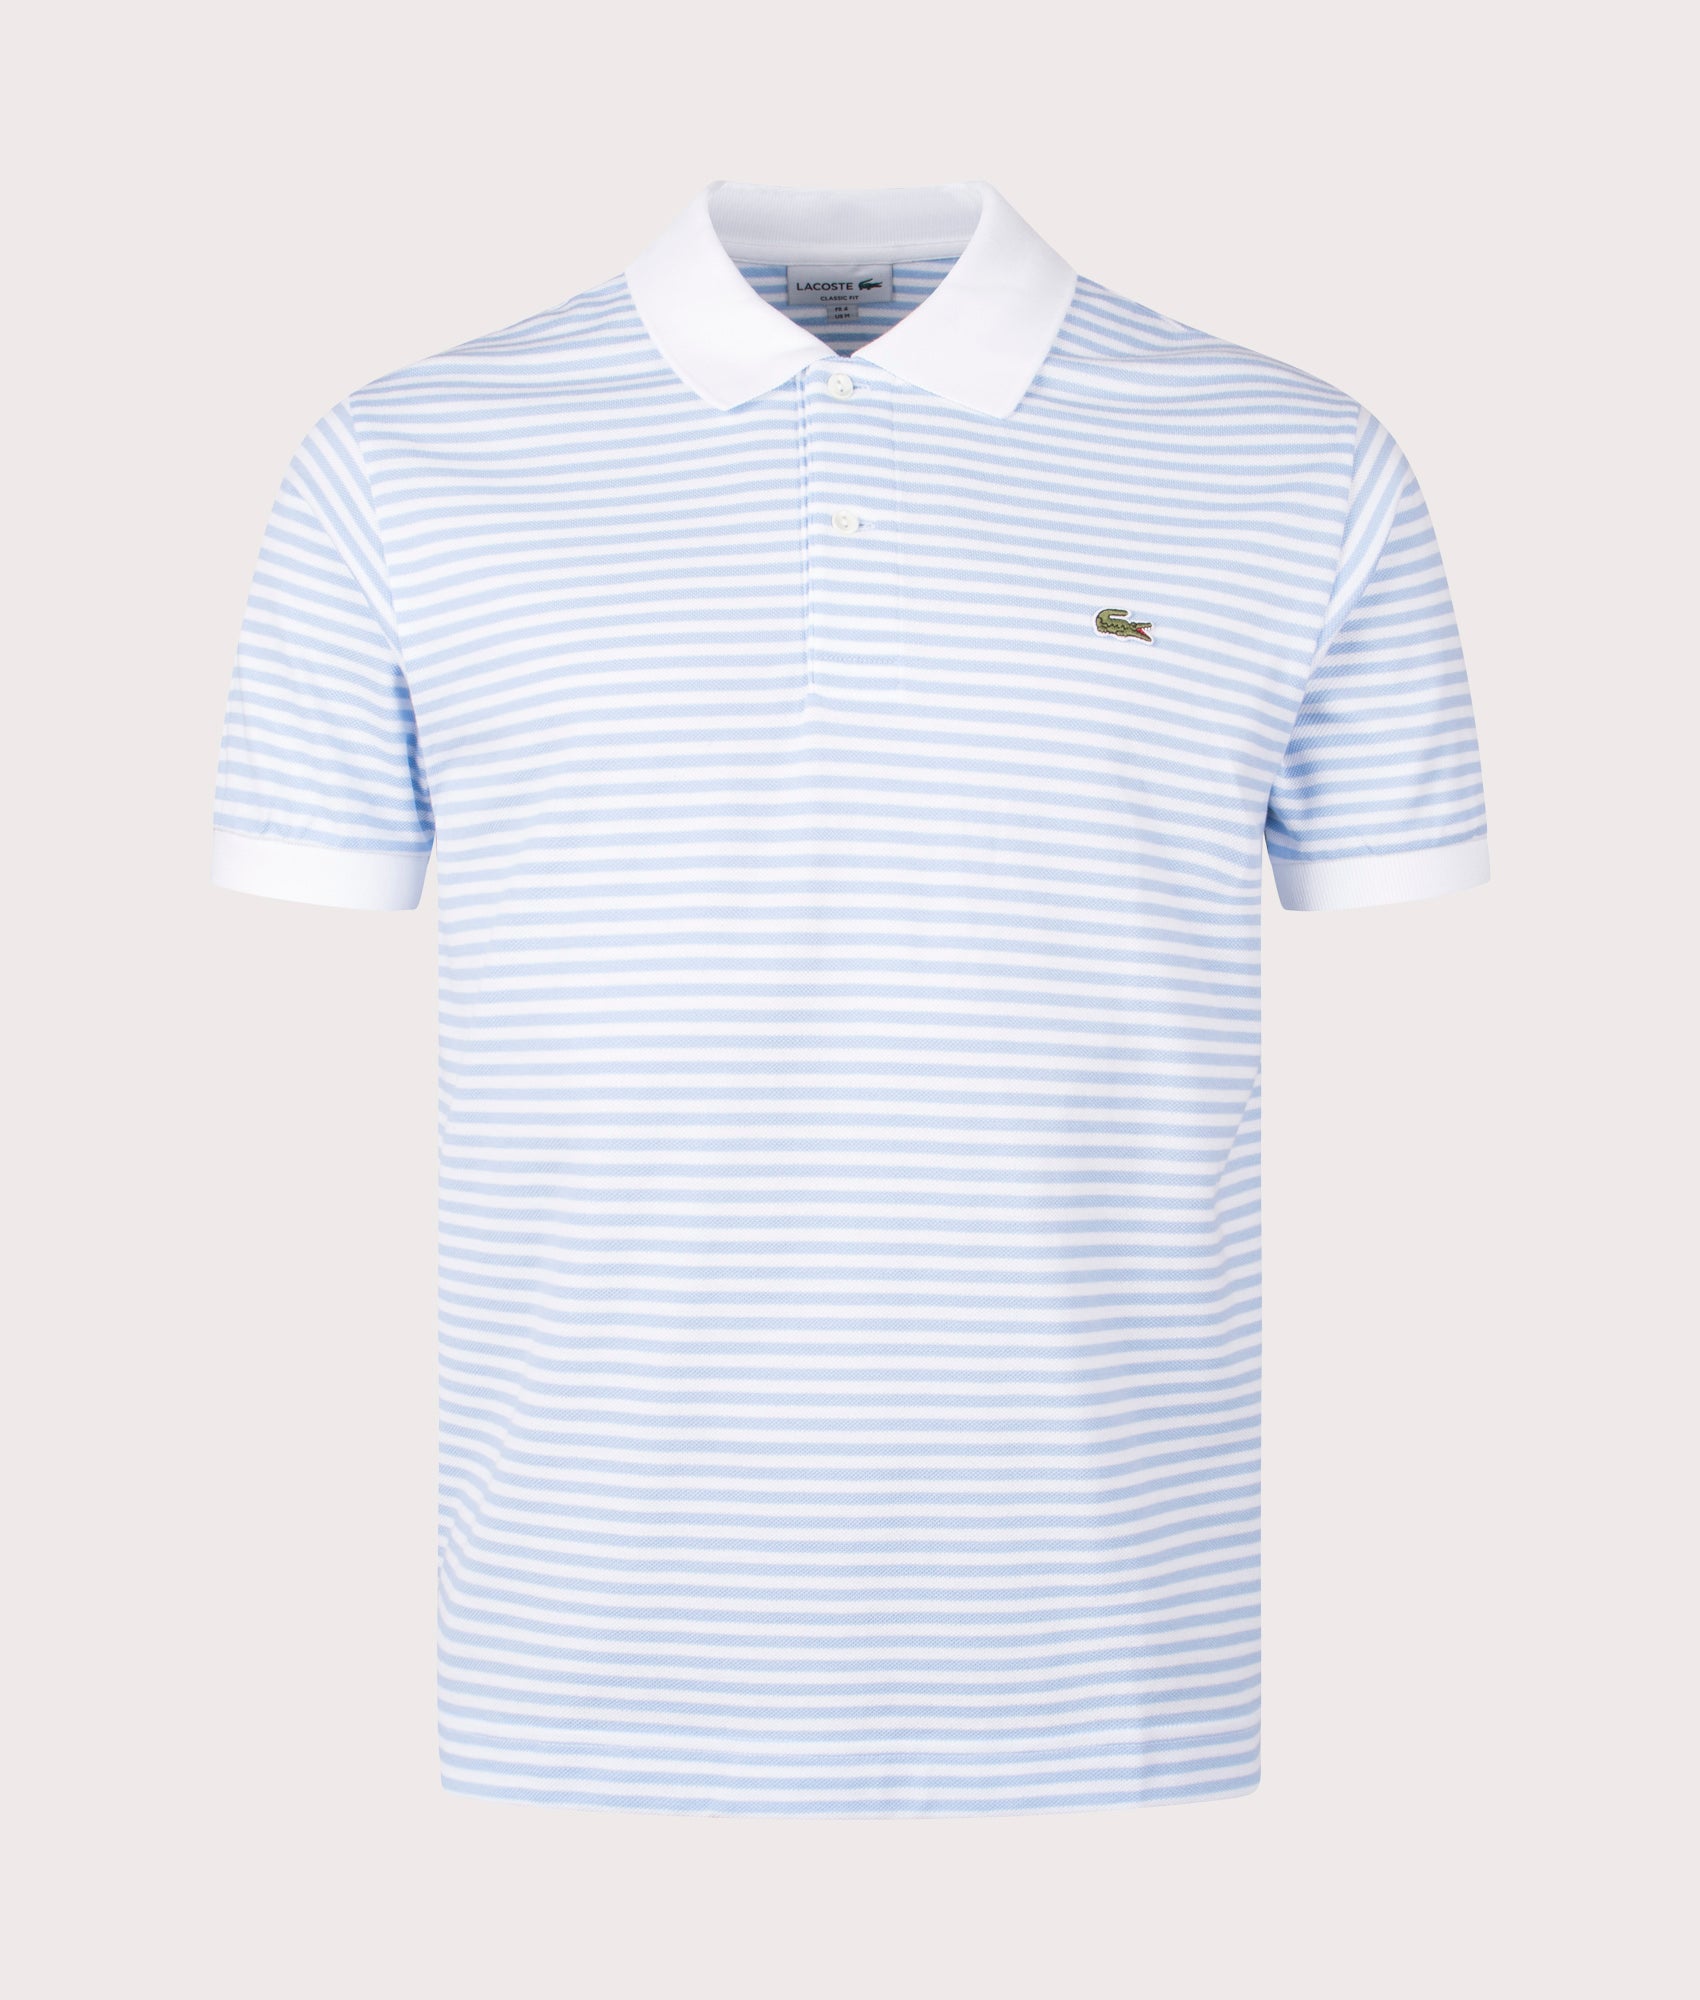 Lacoste Mens Ribbed Collar Striped Polo Shirt - Colour: F6Z White/Overview - Size: 5/L